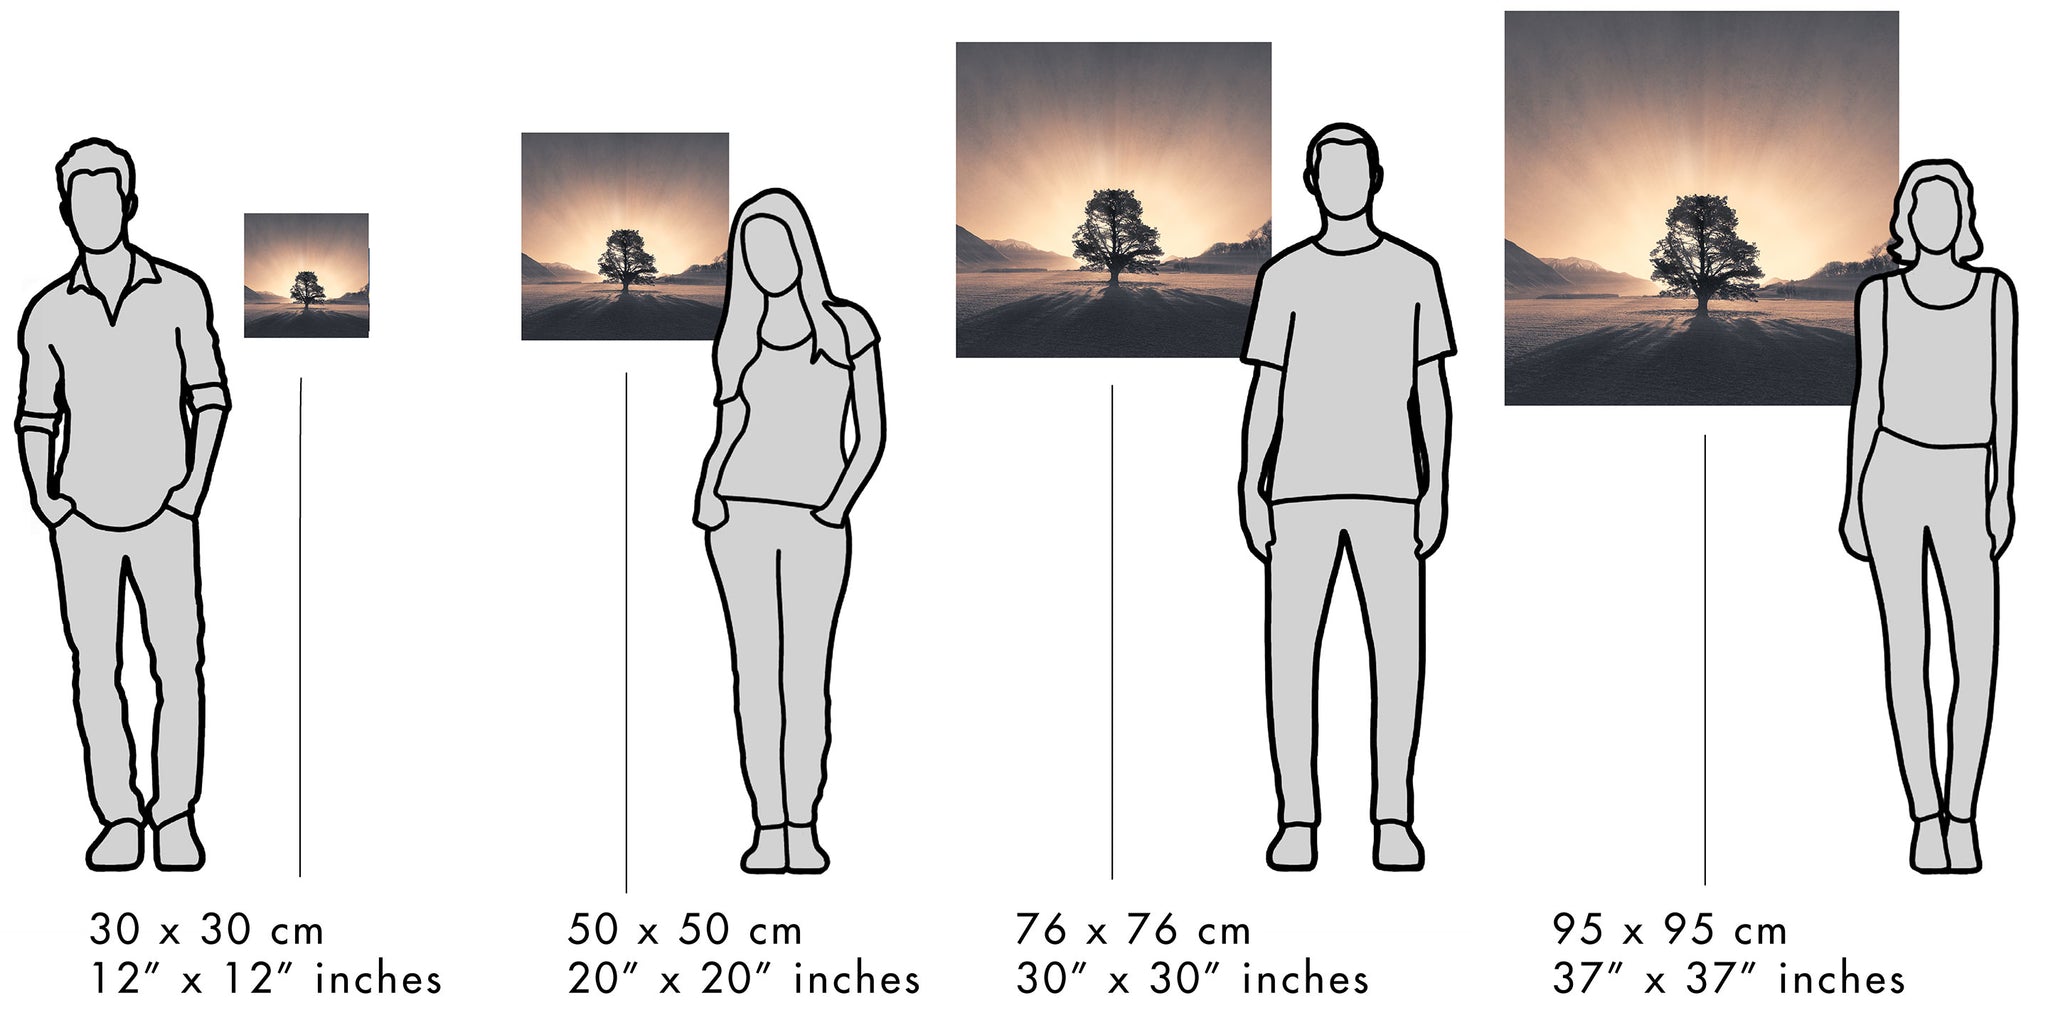 Image of people next to different canvas or print sizes as a comparison guide